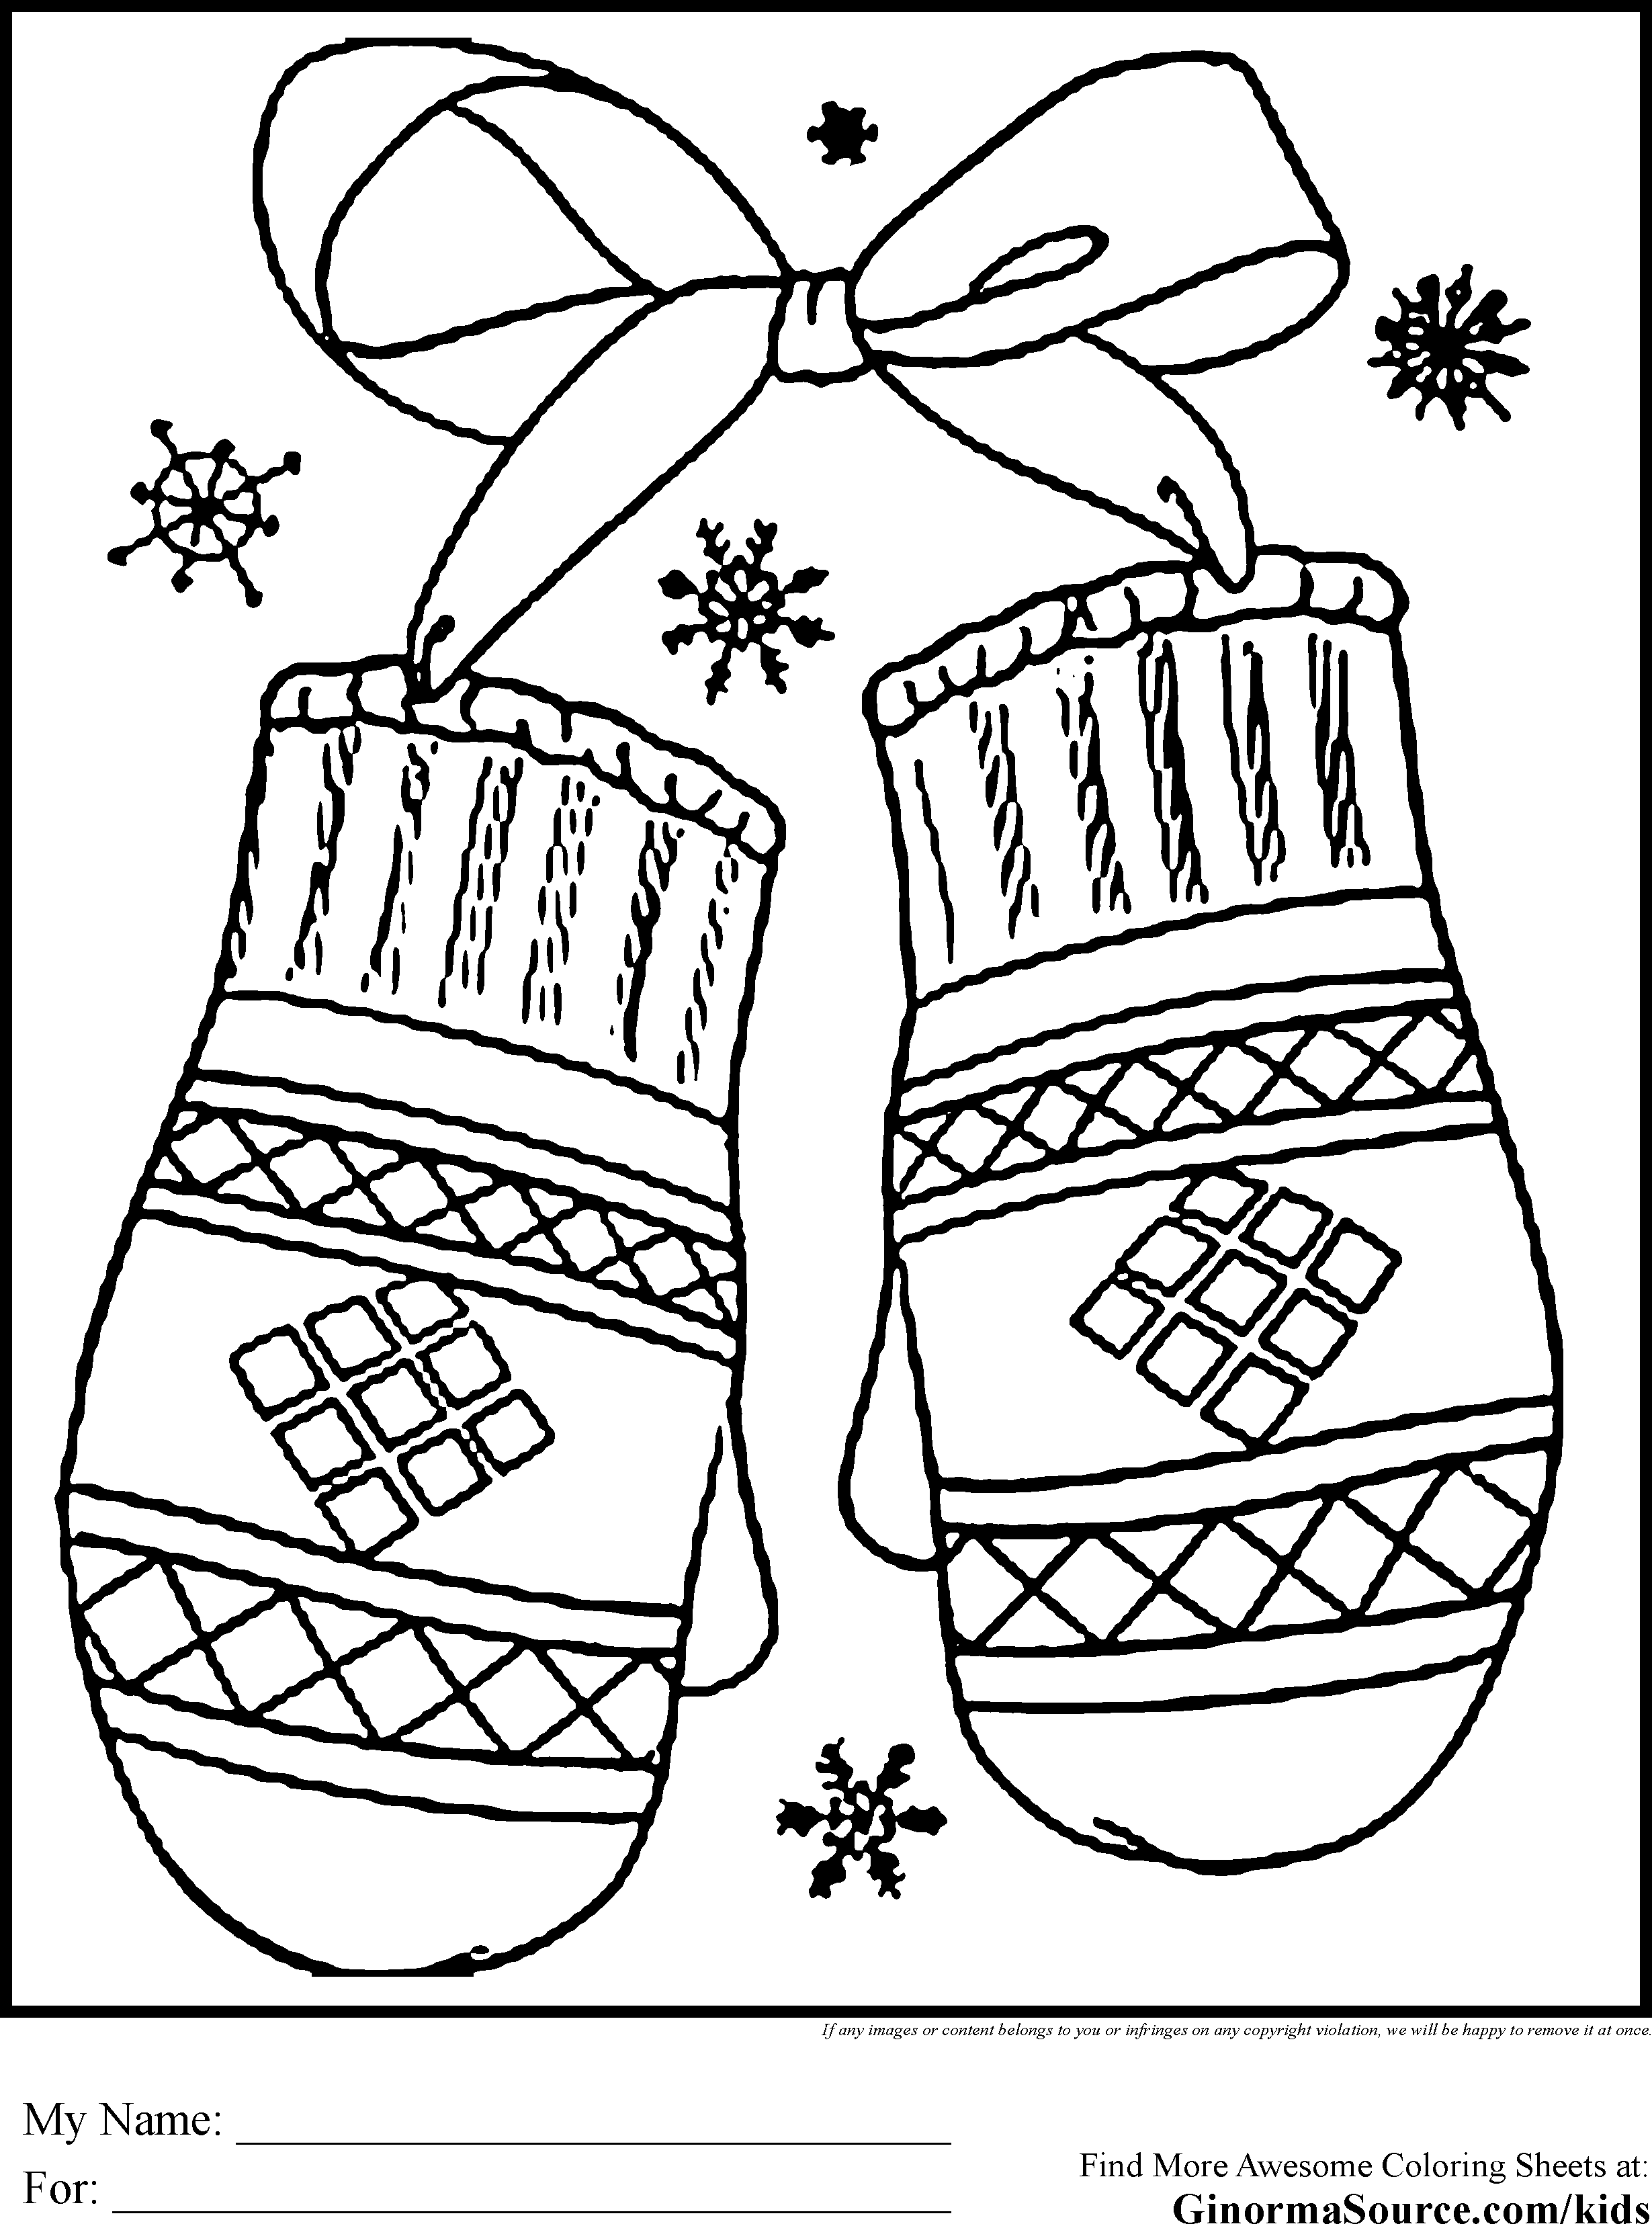 Winter Season Coloring Pages | Crafts and Worksheets for Preschool ...